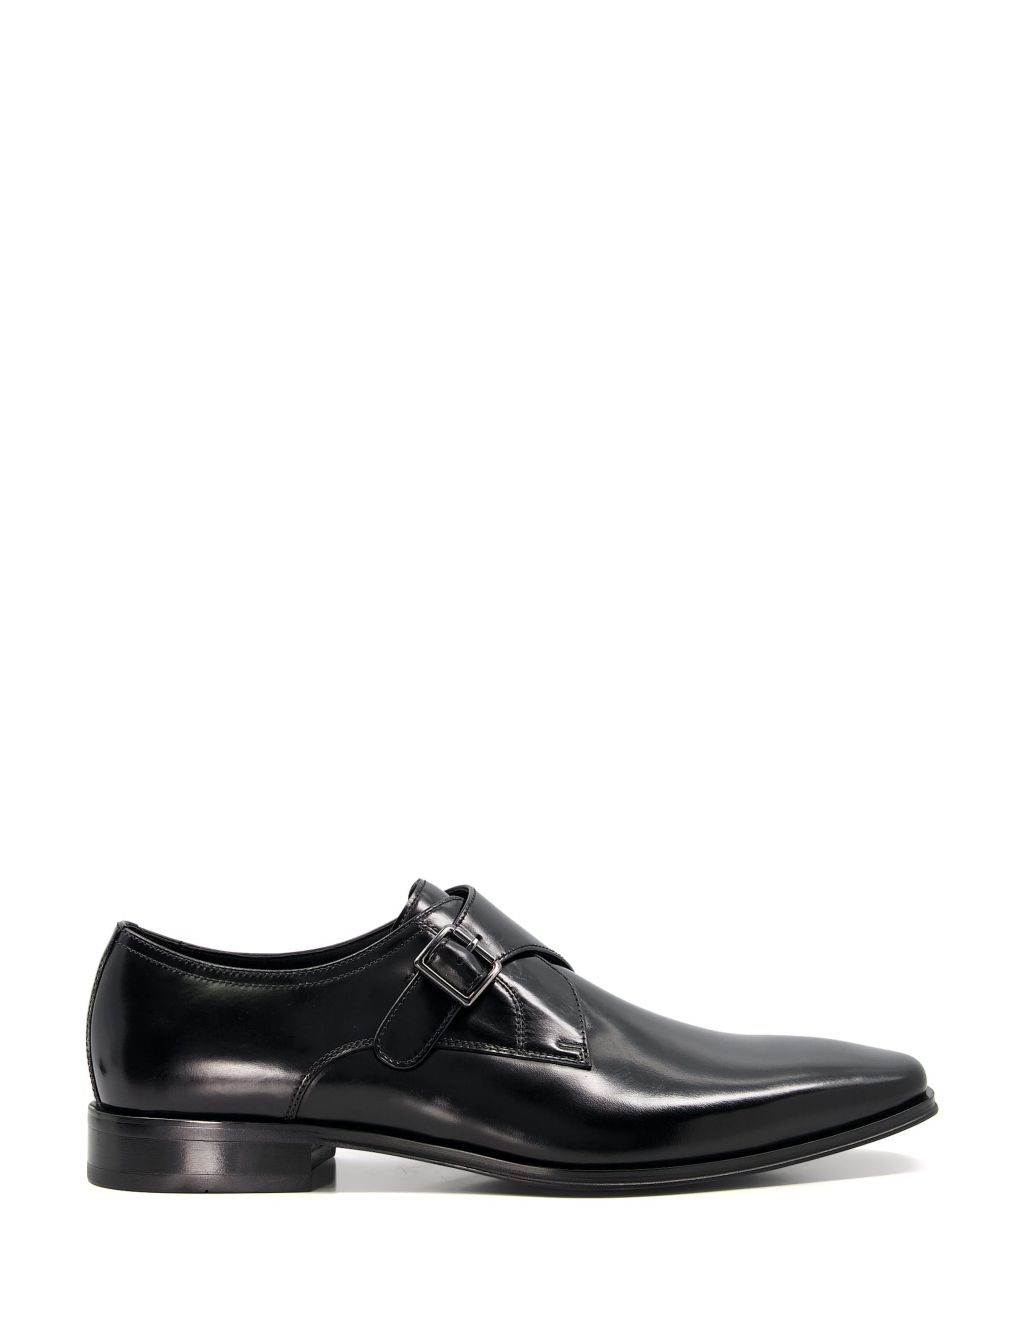 Leather Monk Strap Shoes image 1